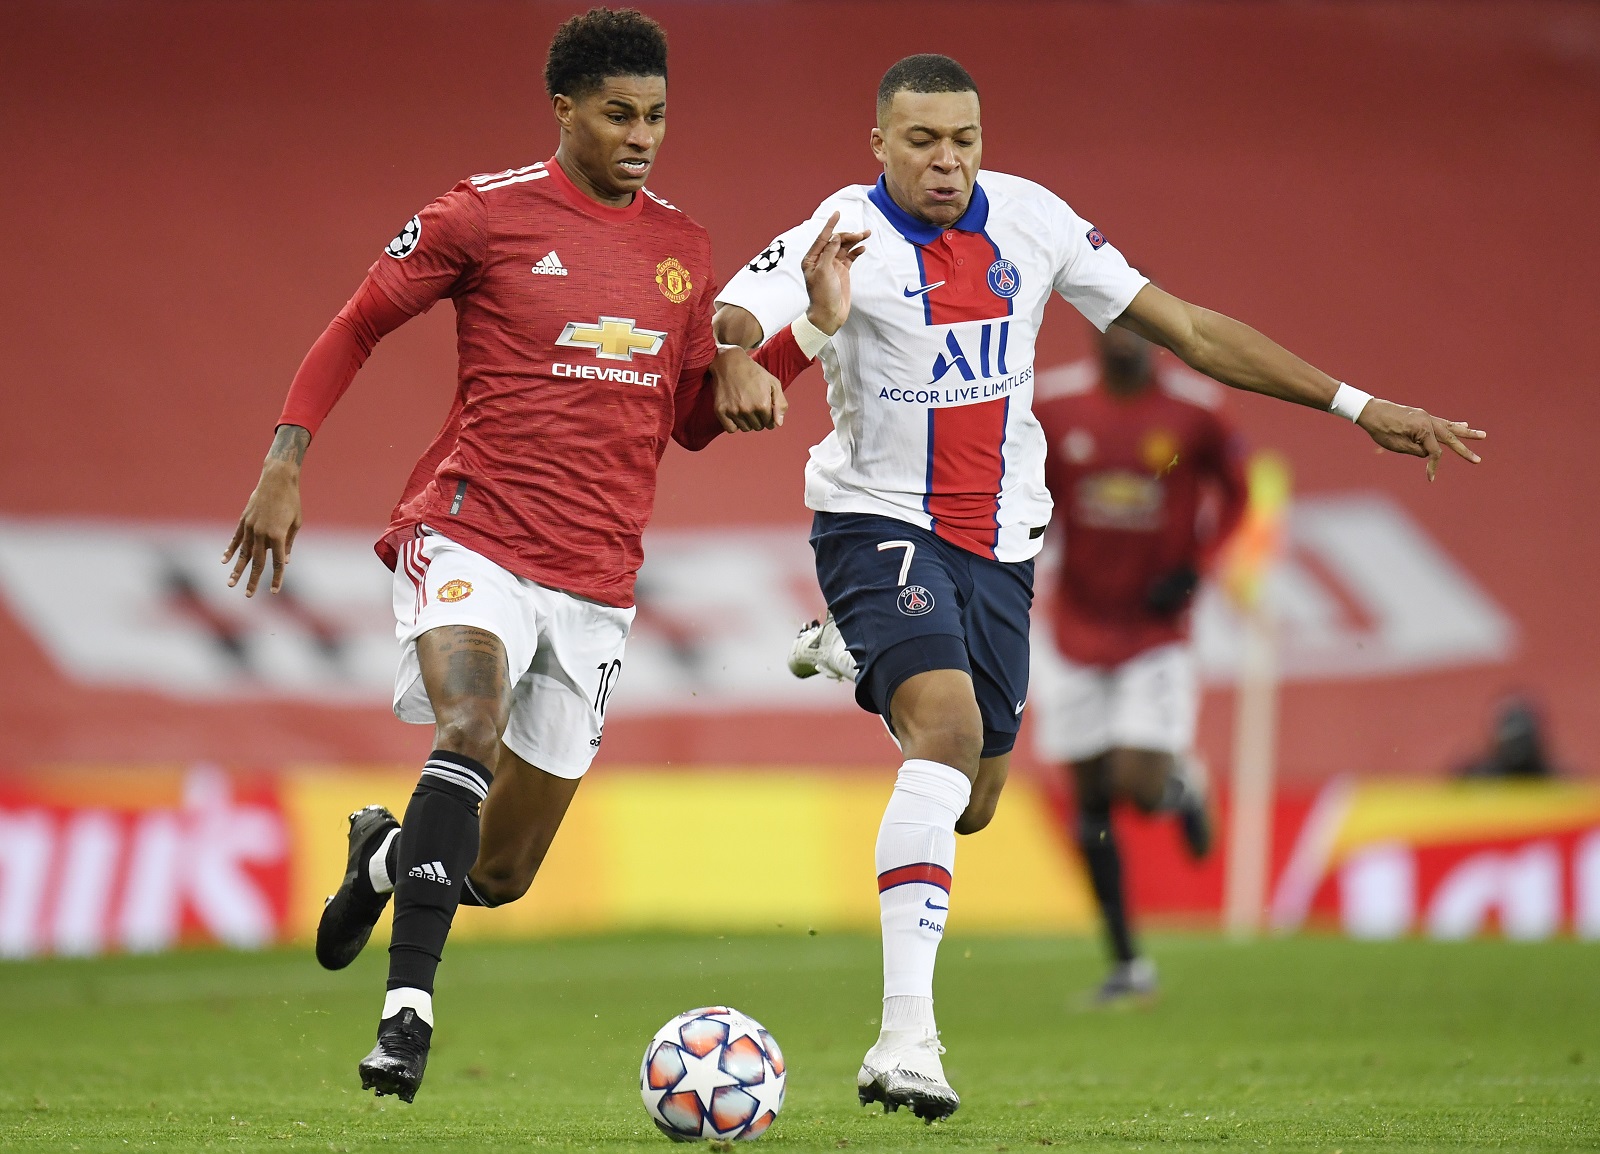 epa08858109 Marcus Rashford of Manchester United (L) in action against Kylian Mbappe of PSG (R) during the UEFA Champions League group H match between Manchester United and PSG in Manchester, Britain, 02 December 2020.  EPA/PETER POWELL